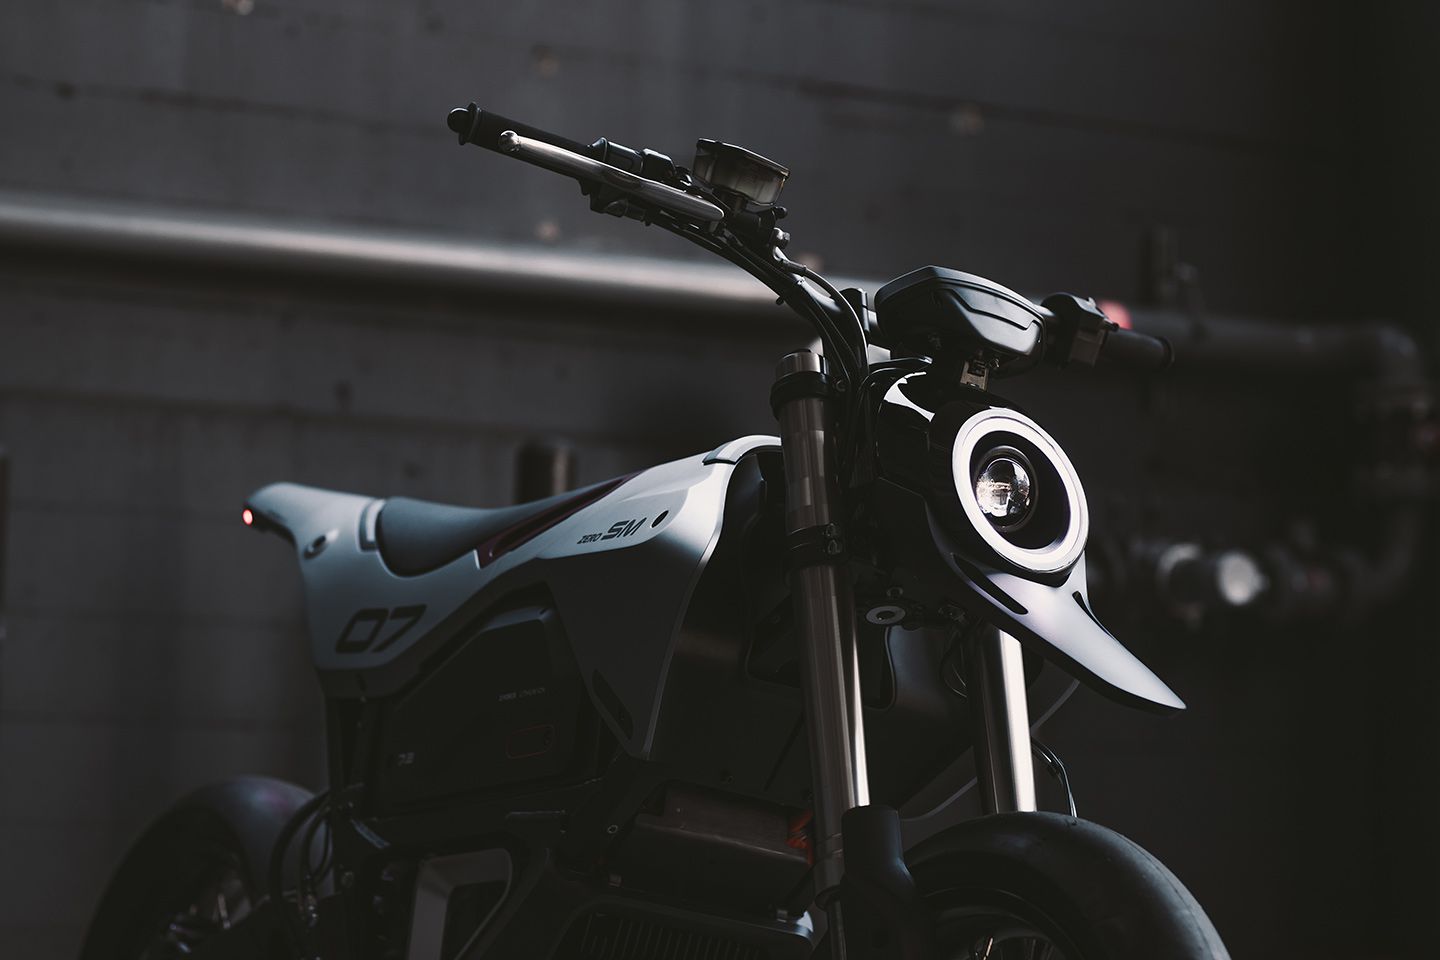 This isn’t the first time Webb has figuratively put paint to canvas for the California-based electric motorcycle manufacturer. Webb first worked with Zero on the SM concept bike, which heavily influenced the brand’s e-supermoto, the FXE. We’re hoping the SR-X design trickles its way into Zero’s future designs as well.